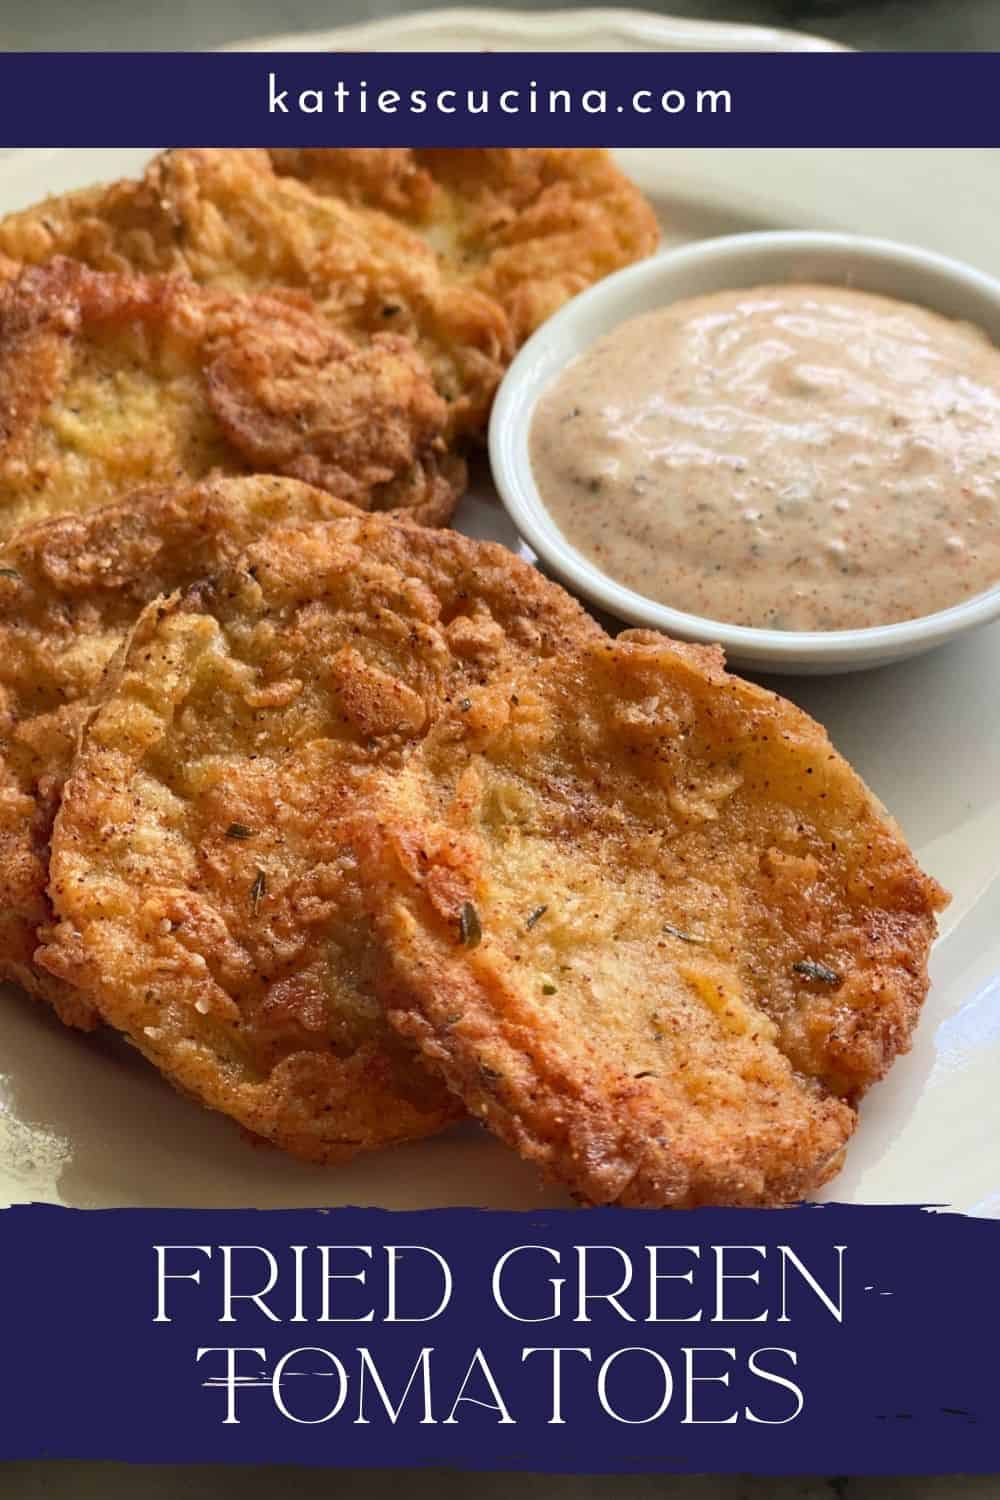 Fried Green Tomatoes with Cajun Ranch Dipping Sauce - Katie's Cucina